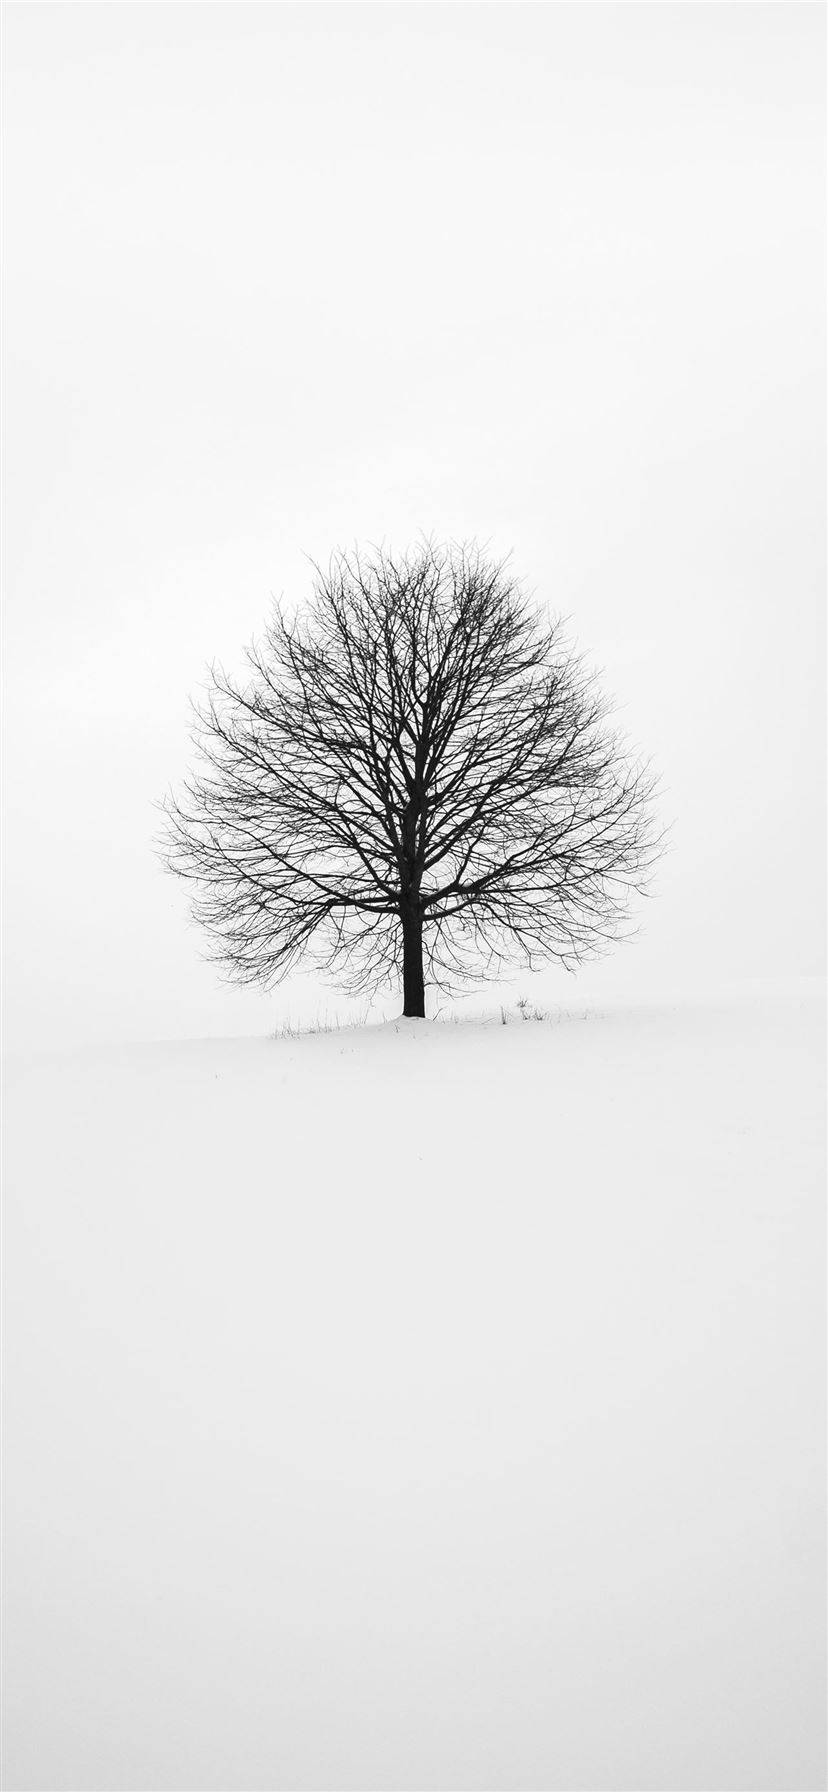 White With Leafless Tree Iphone Wallpaper